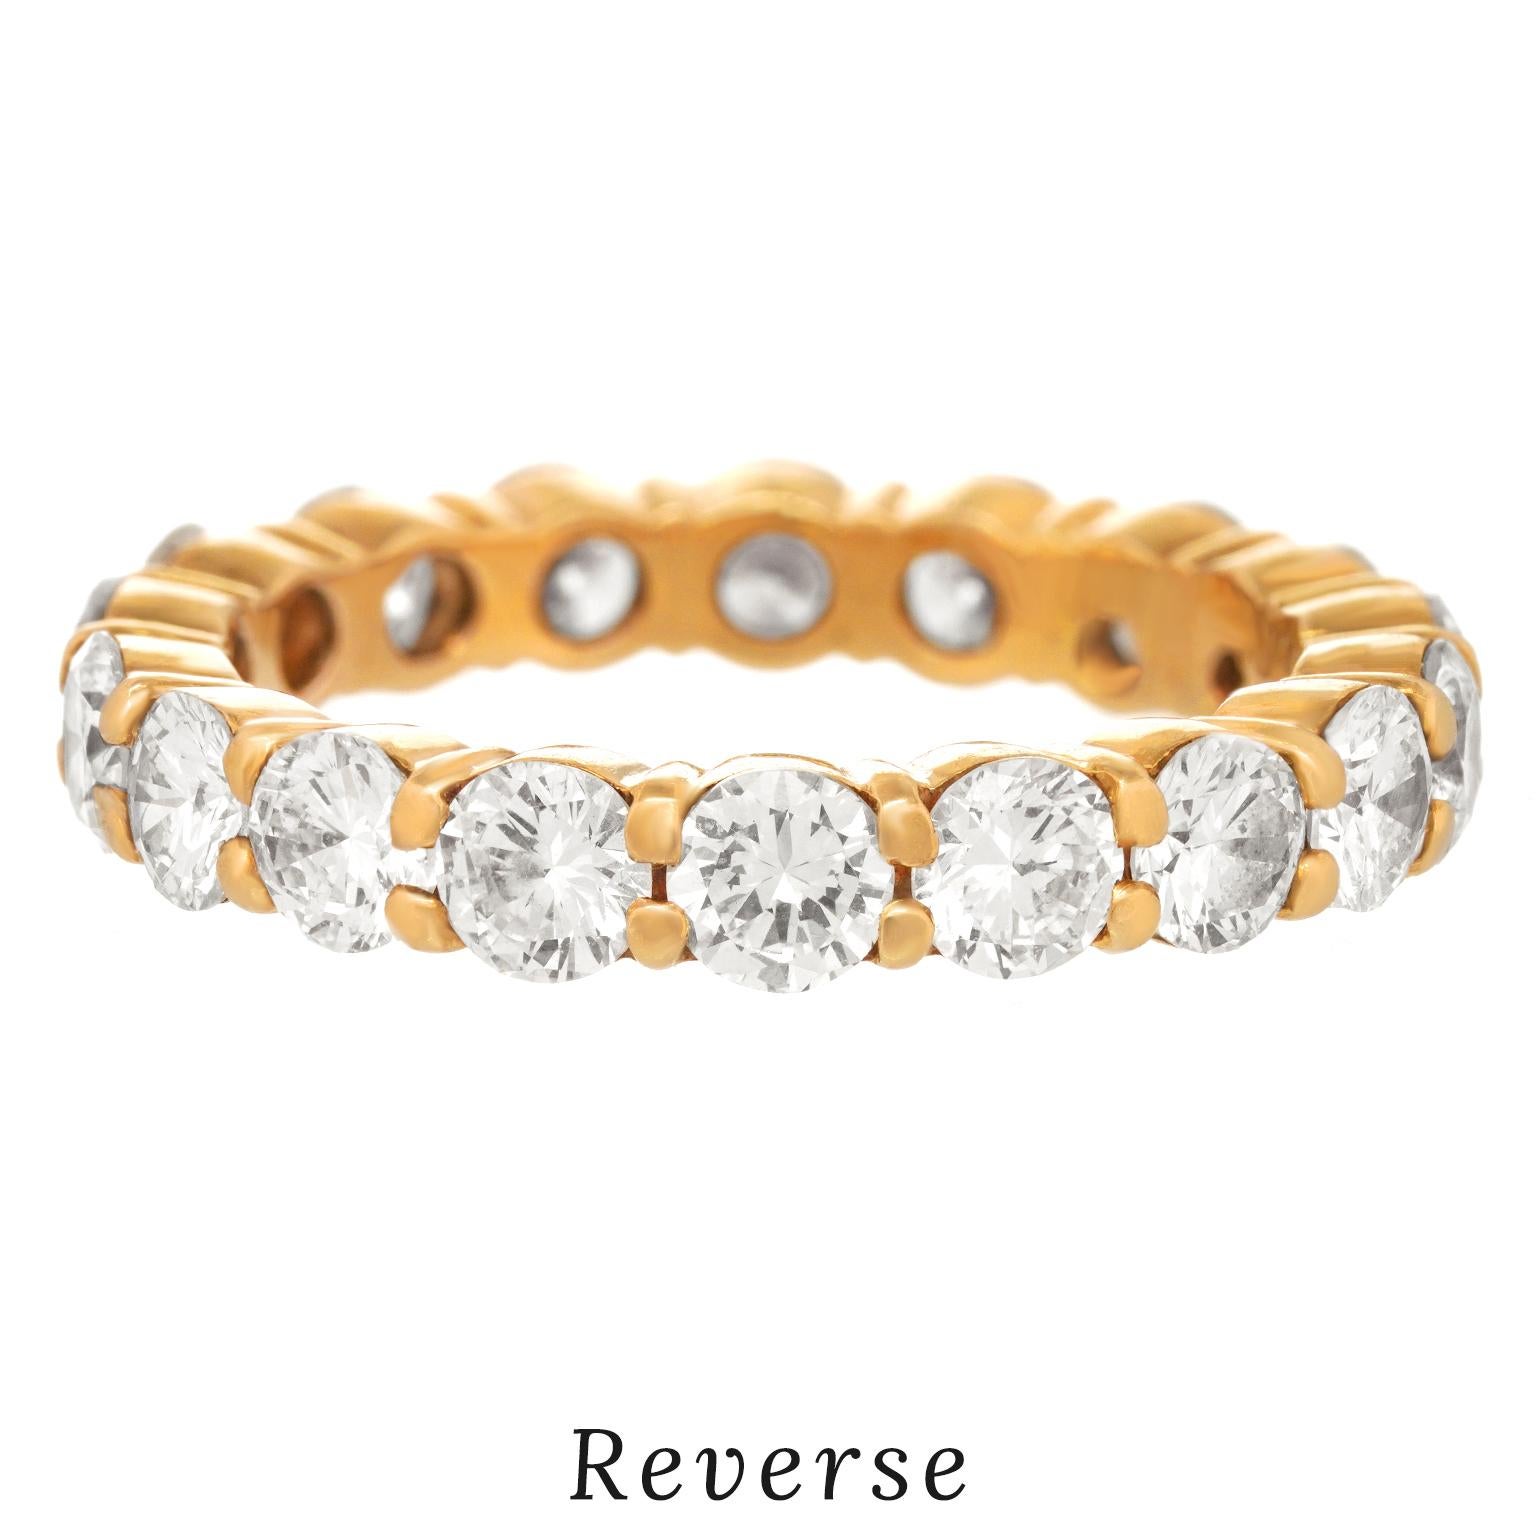 Circa 1960s, 18k, by Boucheron, France.  Set with 2.25 carats of superb white diamonds (G color, VS2 clarity), this Boucheron eternity band set the sixties on fire.  Radiating luxury without ostentation (so French!), it is elegantly stylish.